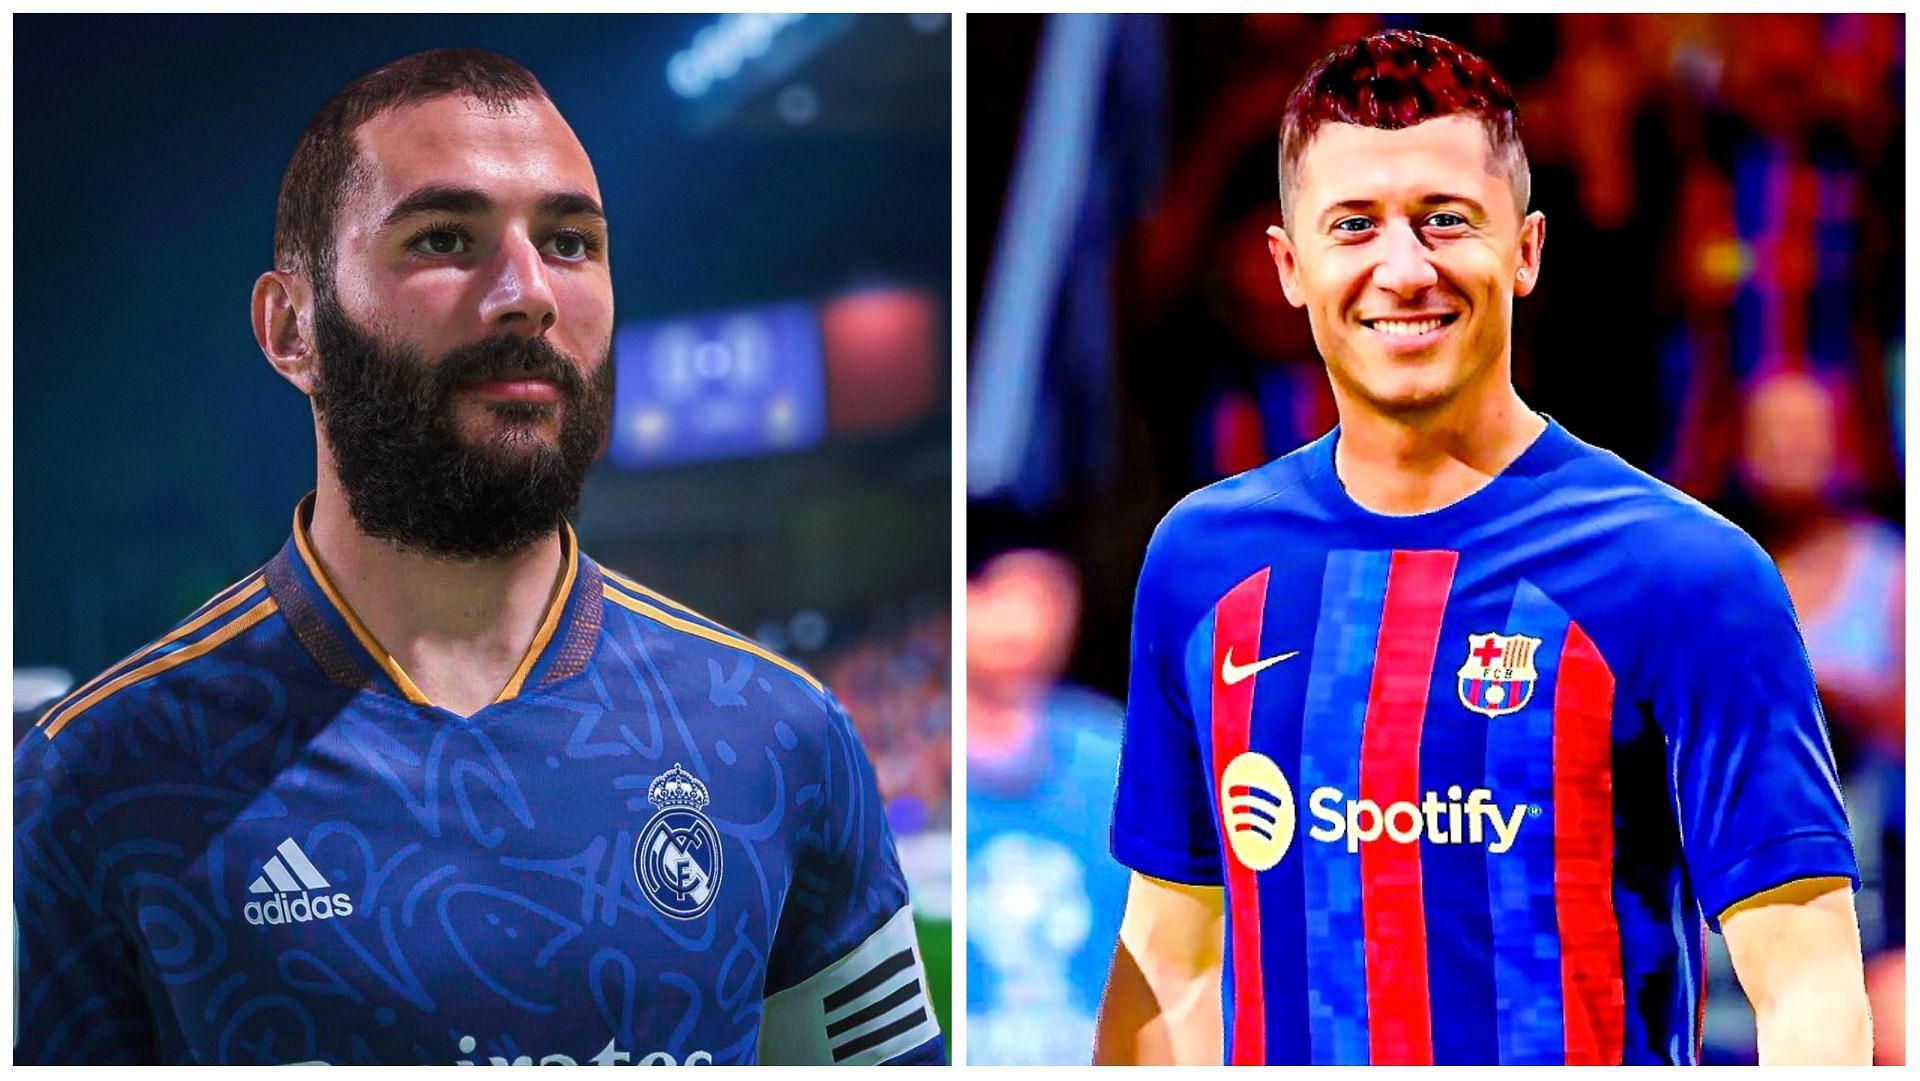 Karim Benzema and Robert Lewandowski are two of the highest rated players in FIFA 23 (Images via EA Sports))